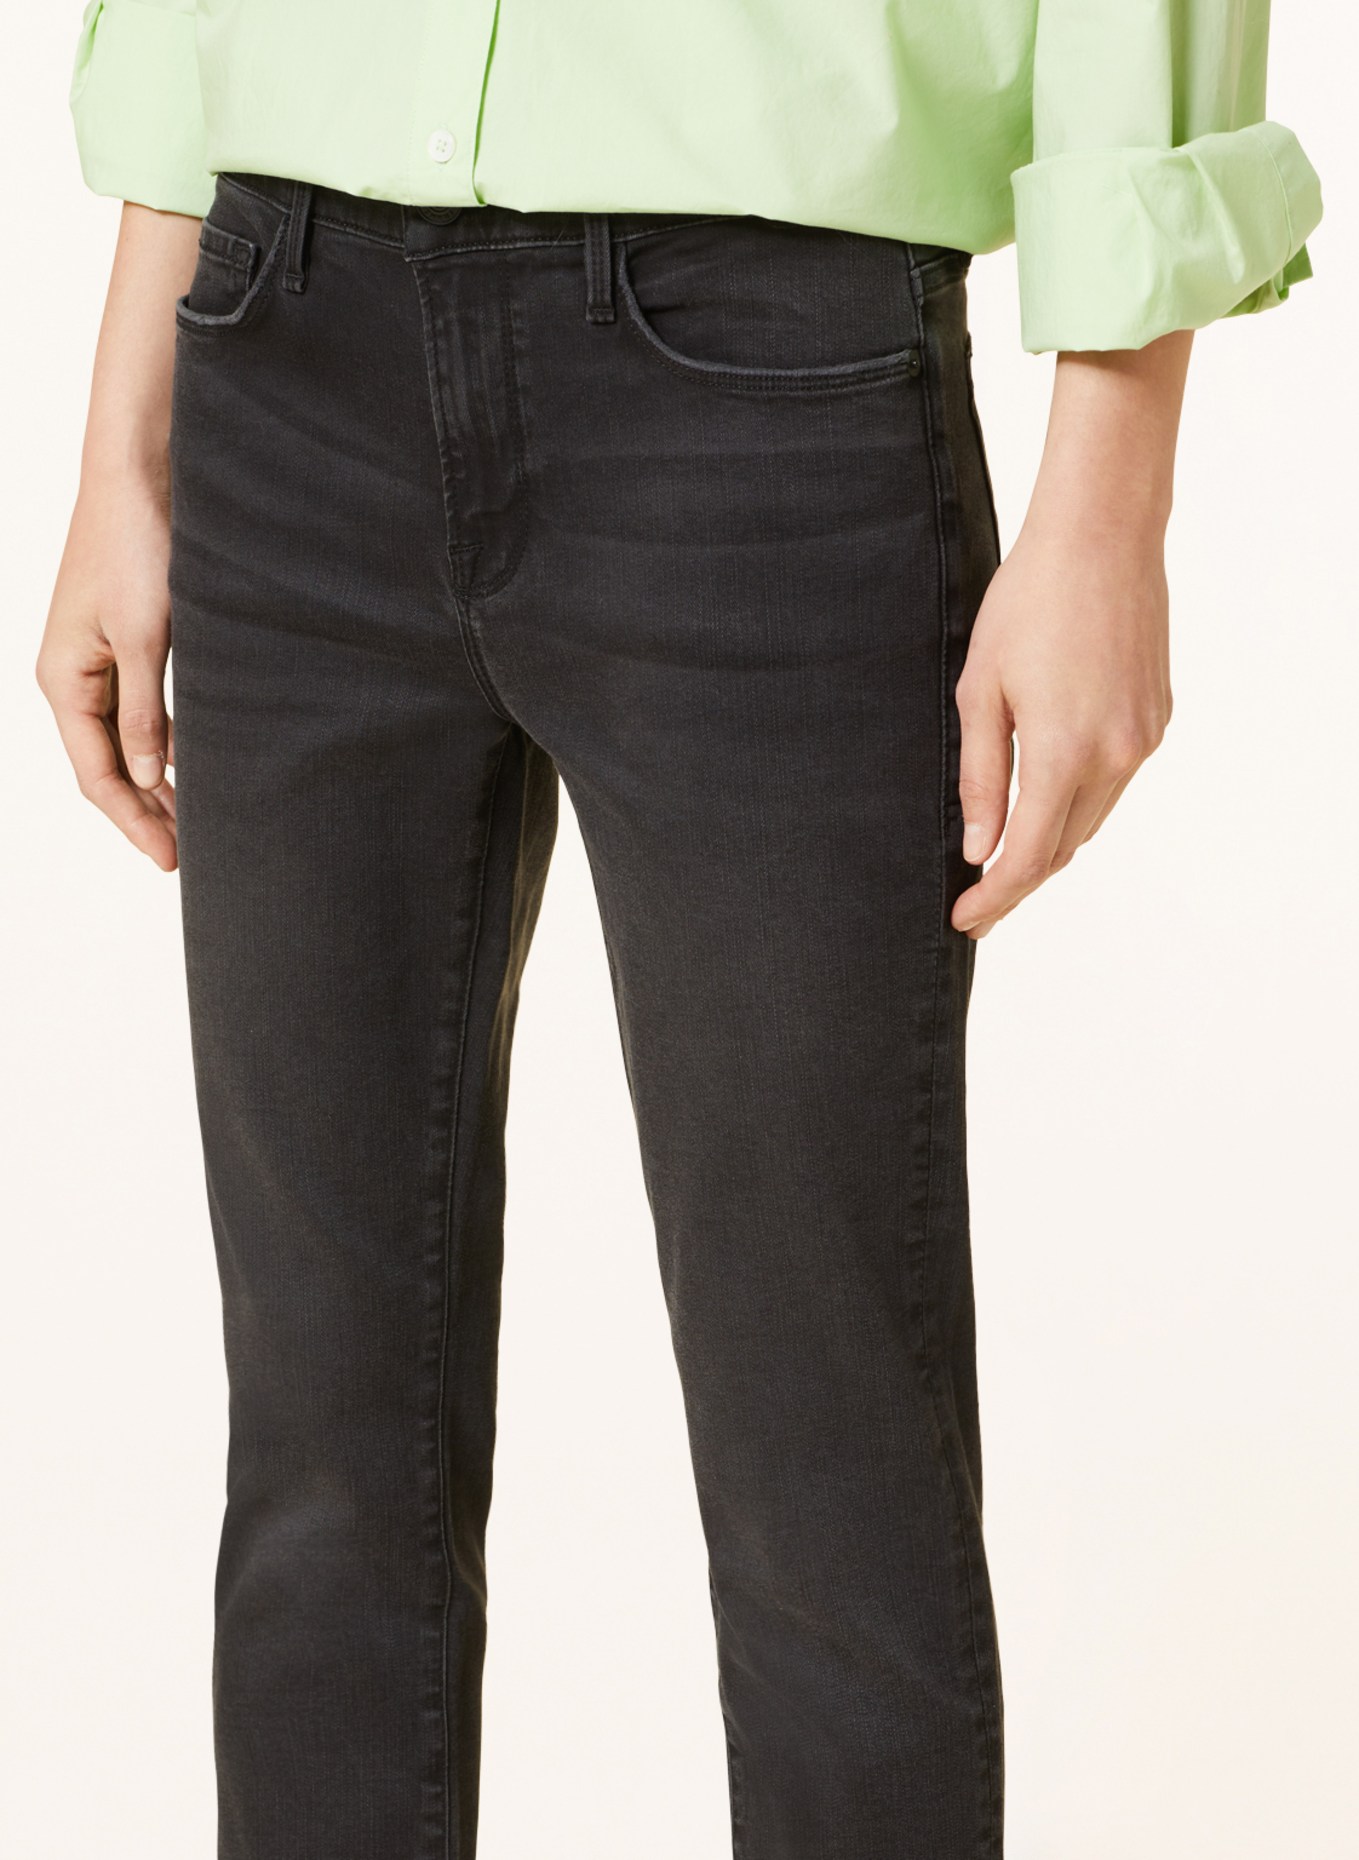 FRAME Skinny Jeans LE GARCON, Farbe: KRRY KERRY (Bild 5)